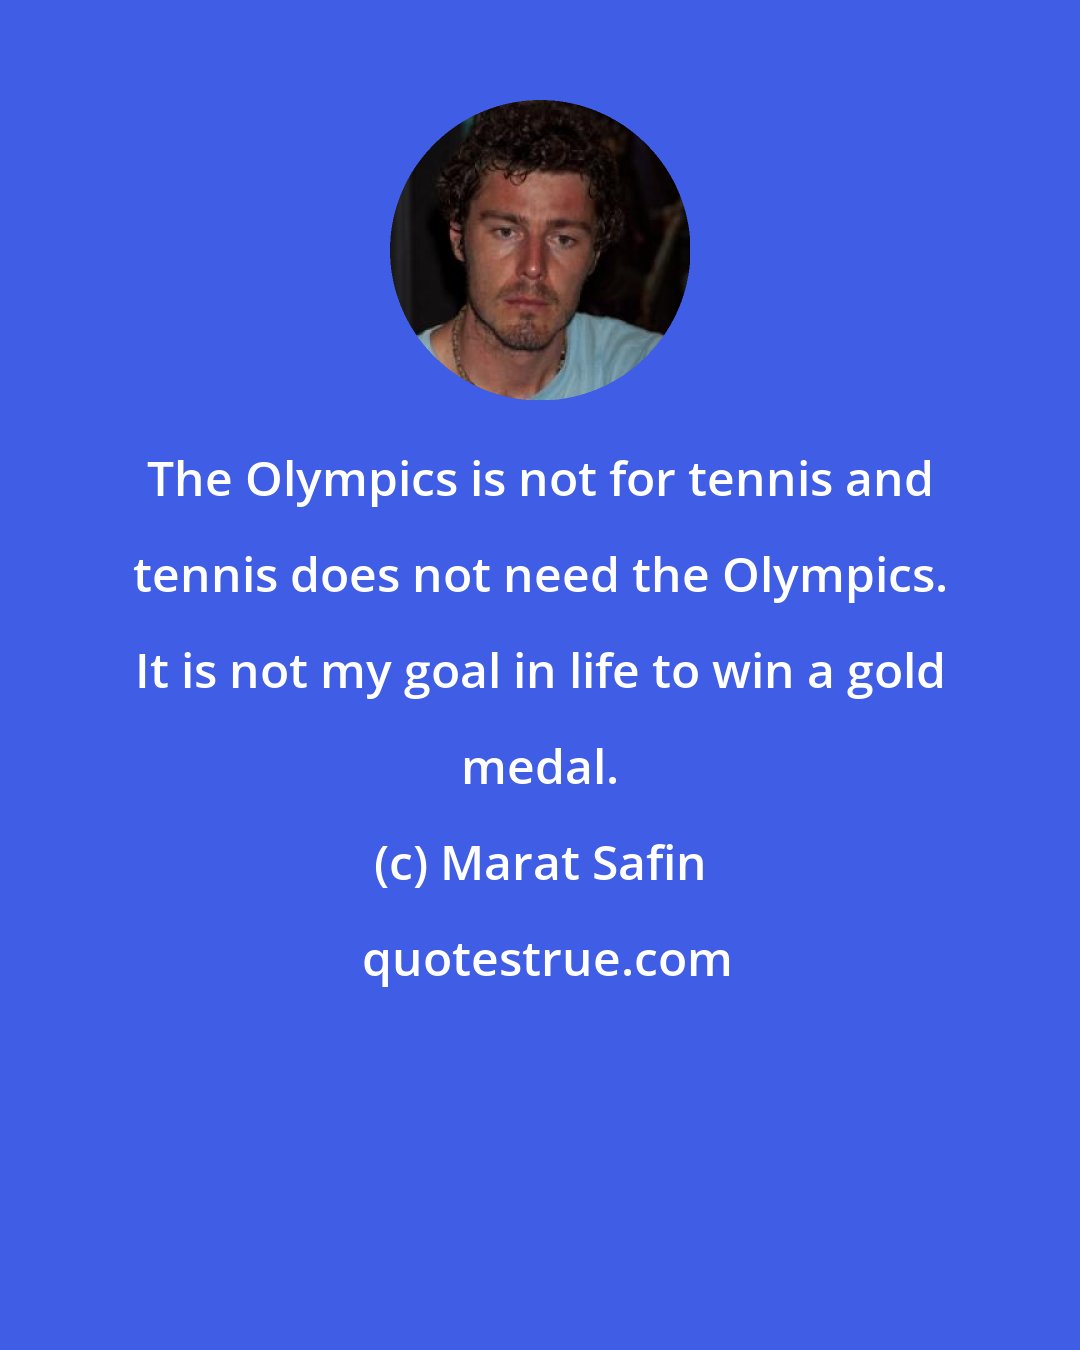 Marat Safin: The Olympics is not for tennis and tennis does not need the Olympics. It is not my goal in life to win a gold medal.